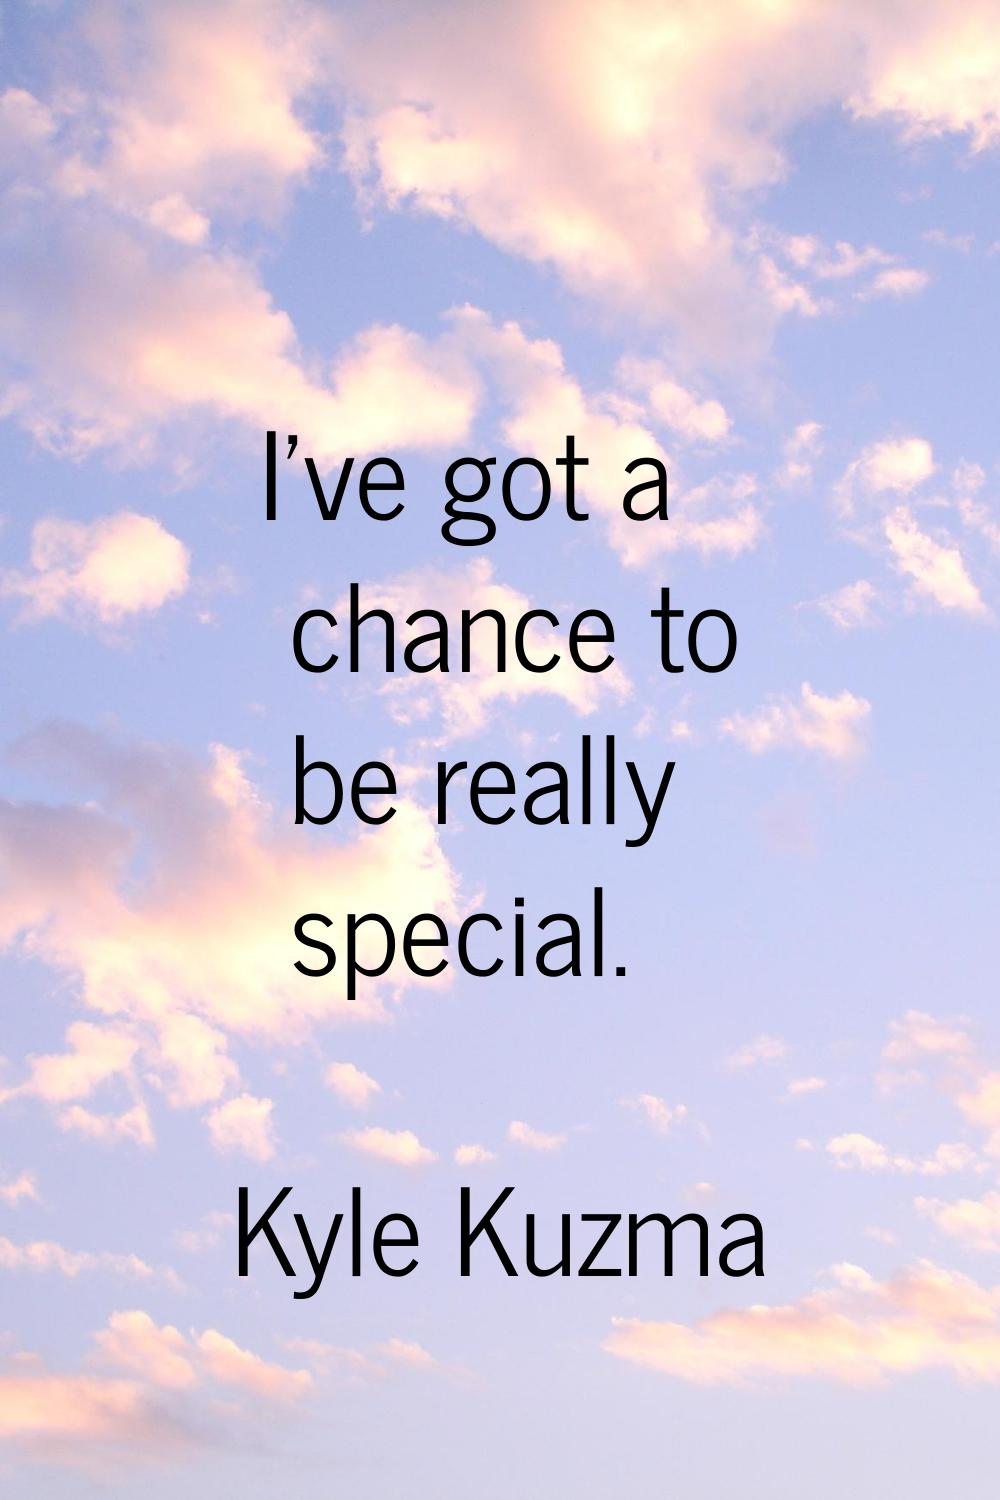 I've got a chance to be really special.